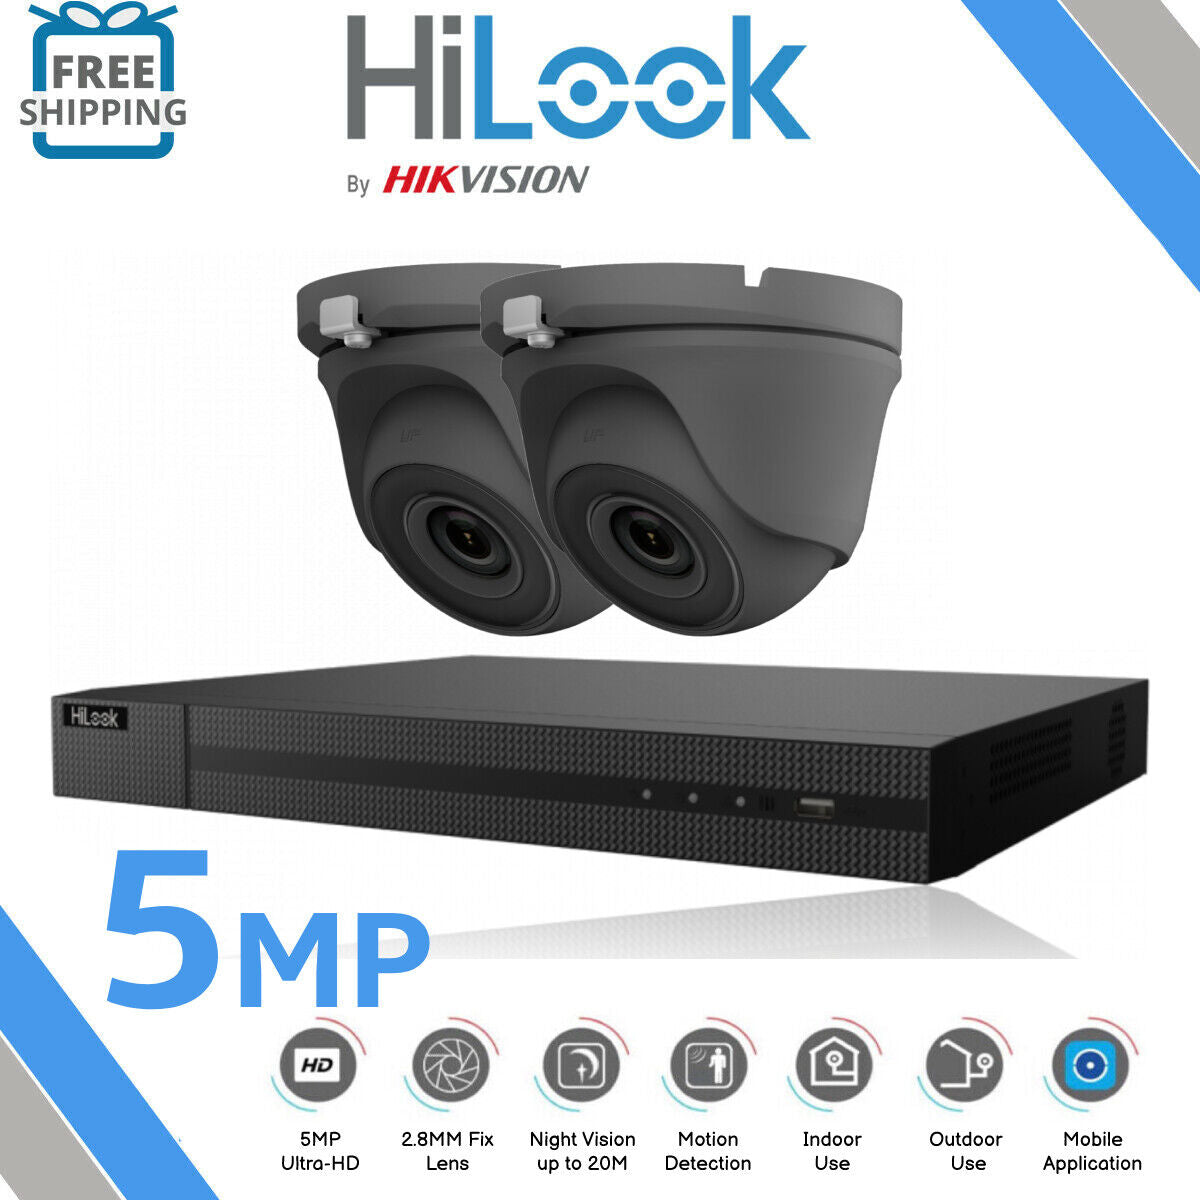 CCTV ULTRA HD 5MP NIGHTVISION OUTDOOR DVR HIK-CONNECT HOME SECURITY SYSTEM KIT 4CH DVR 2x Cameras (grey) 1TB HDD